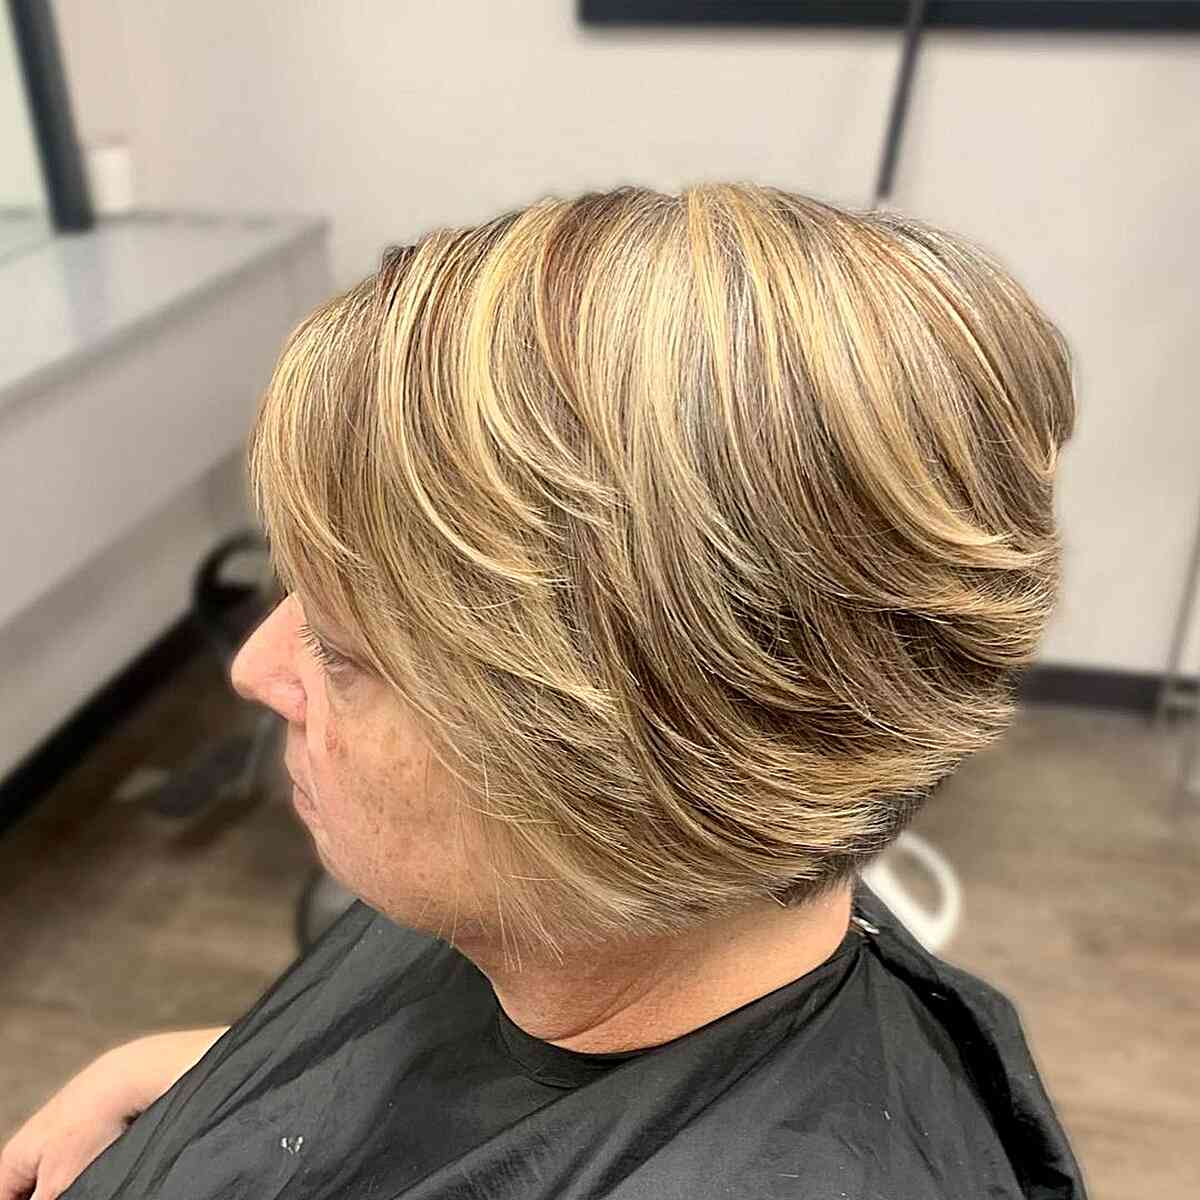 Tapered Choppy Mini Bob with Shorter Layers for women aged 60